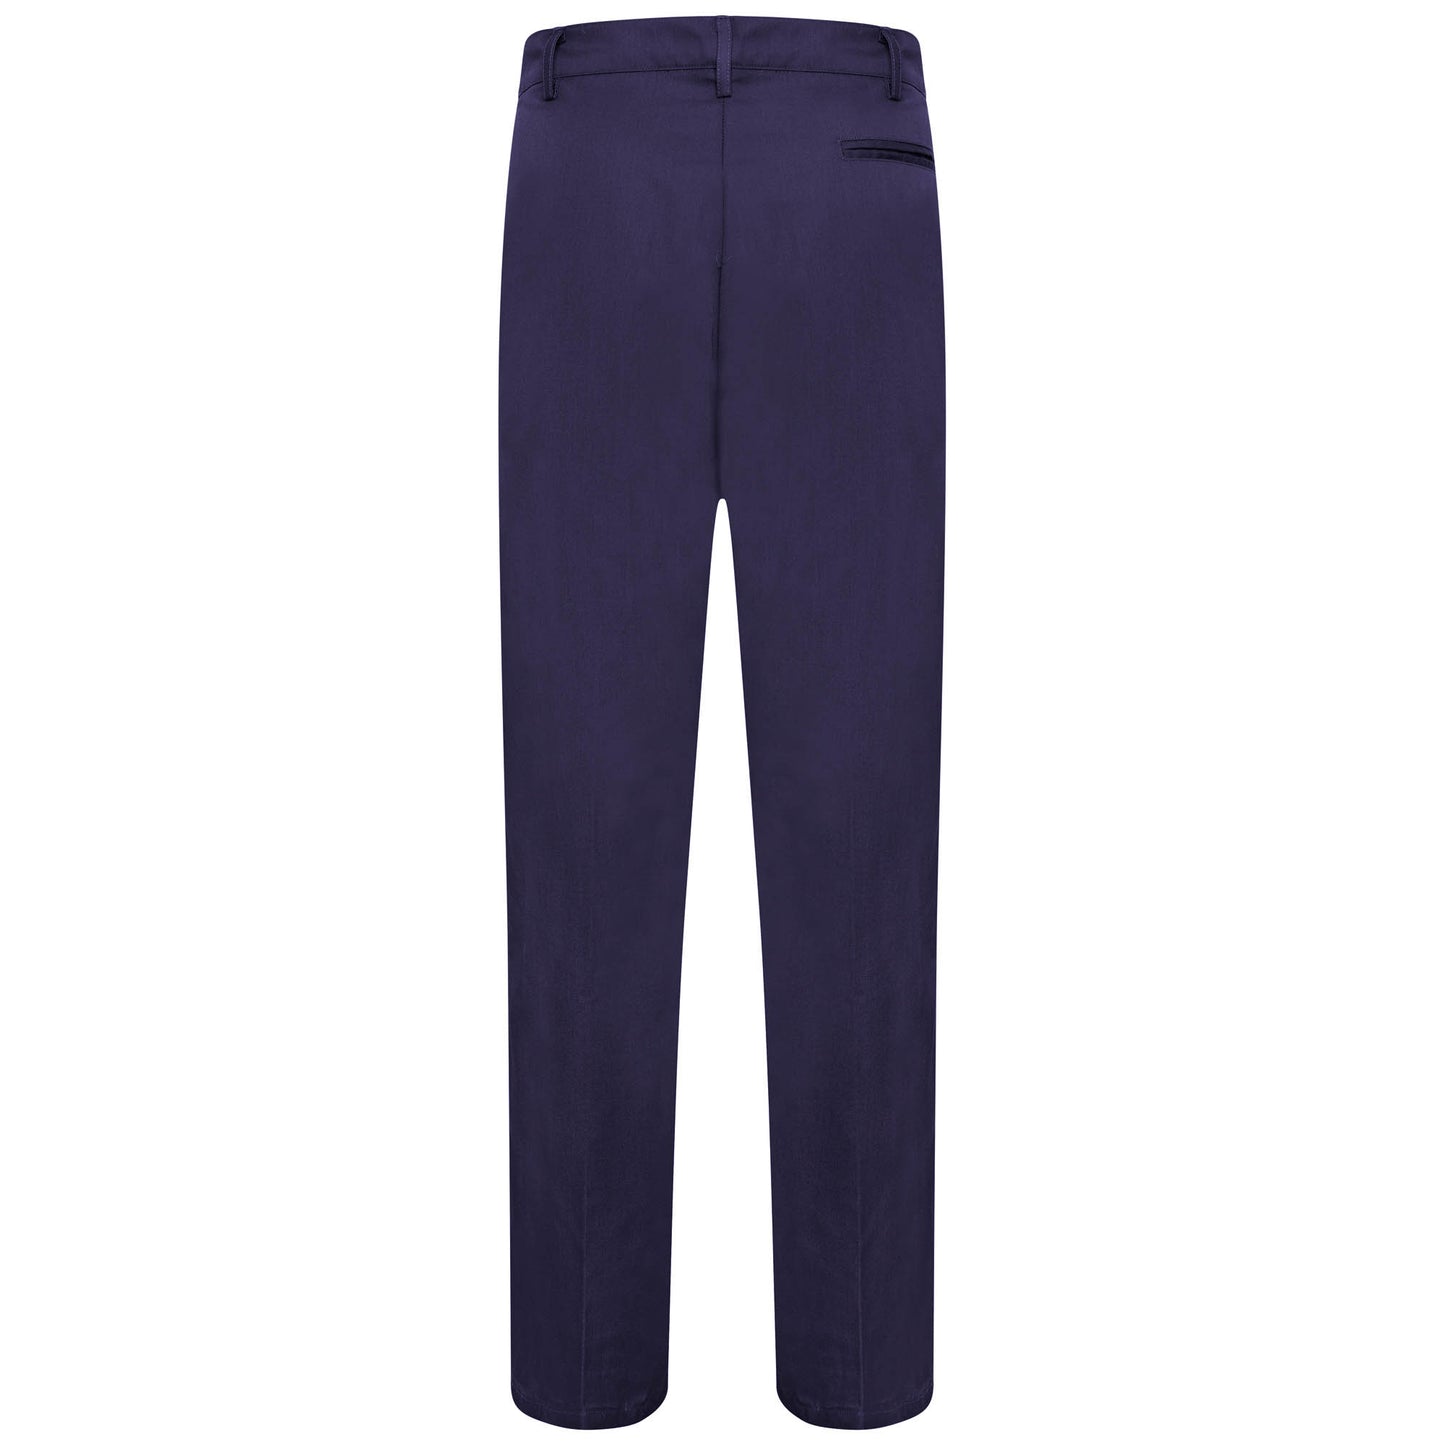 Behrens Mens Trousers with Back Pocket